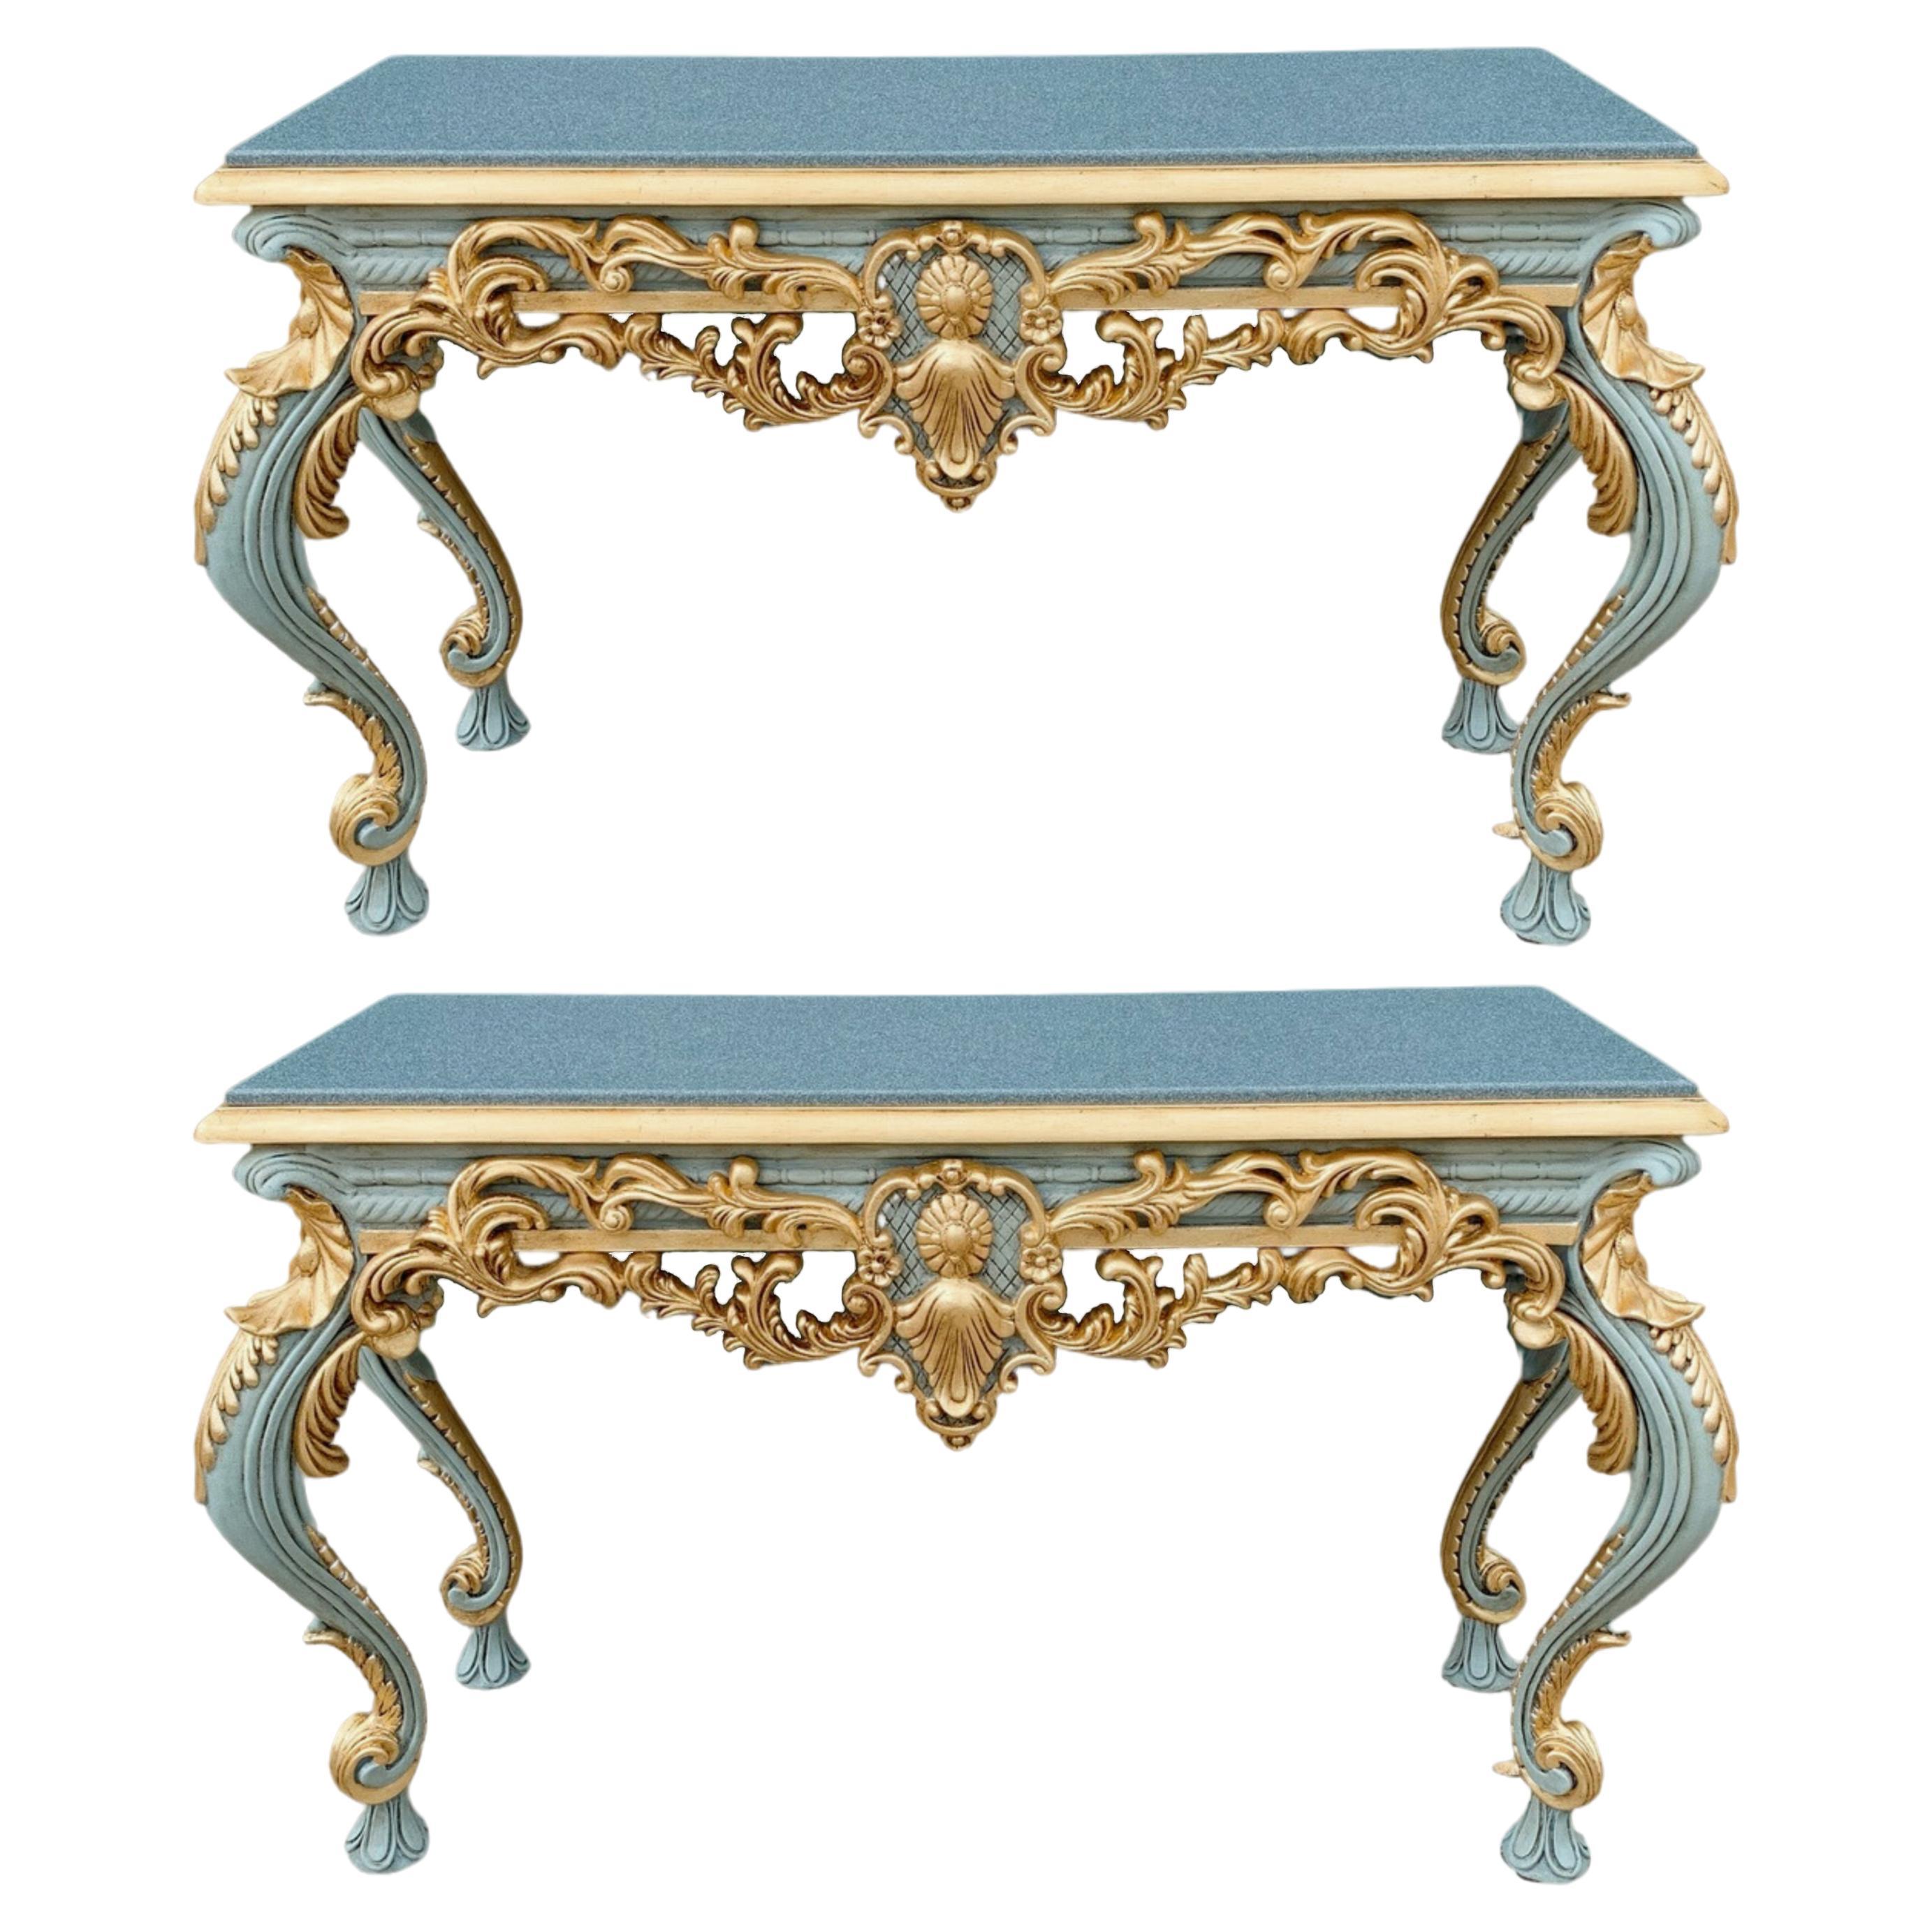 Pair of Louis XIV Style Gilded Console Tables.